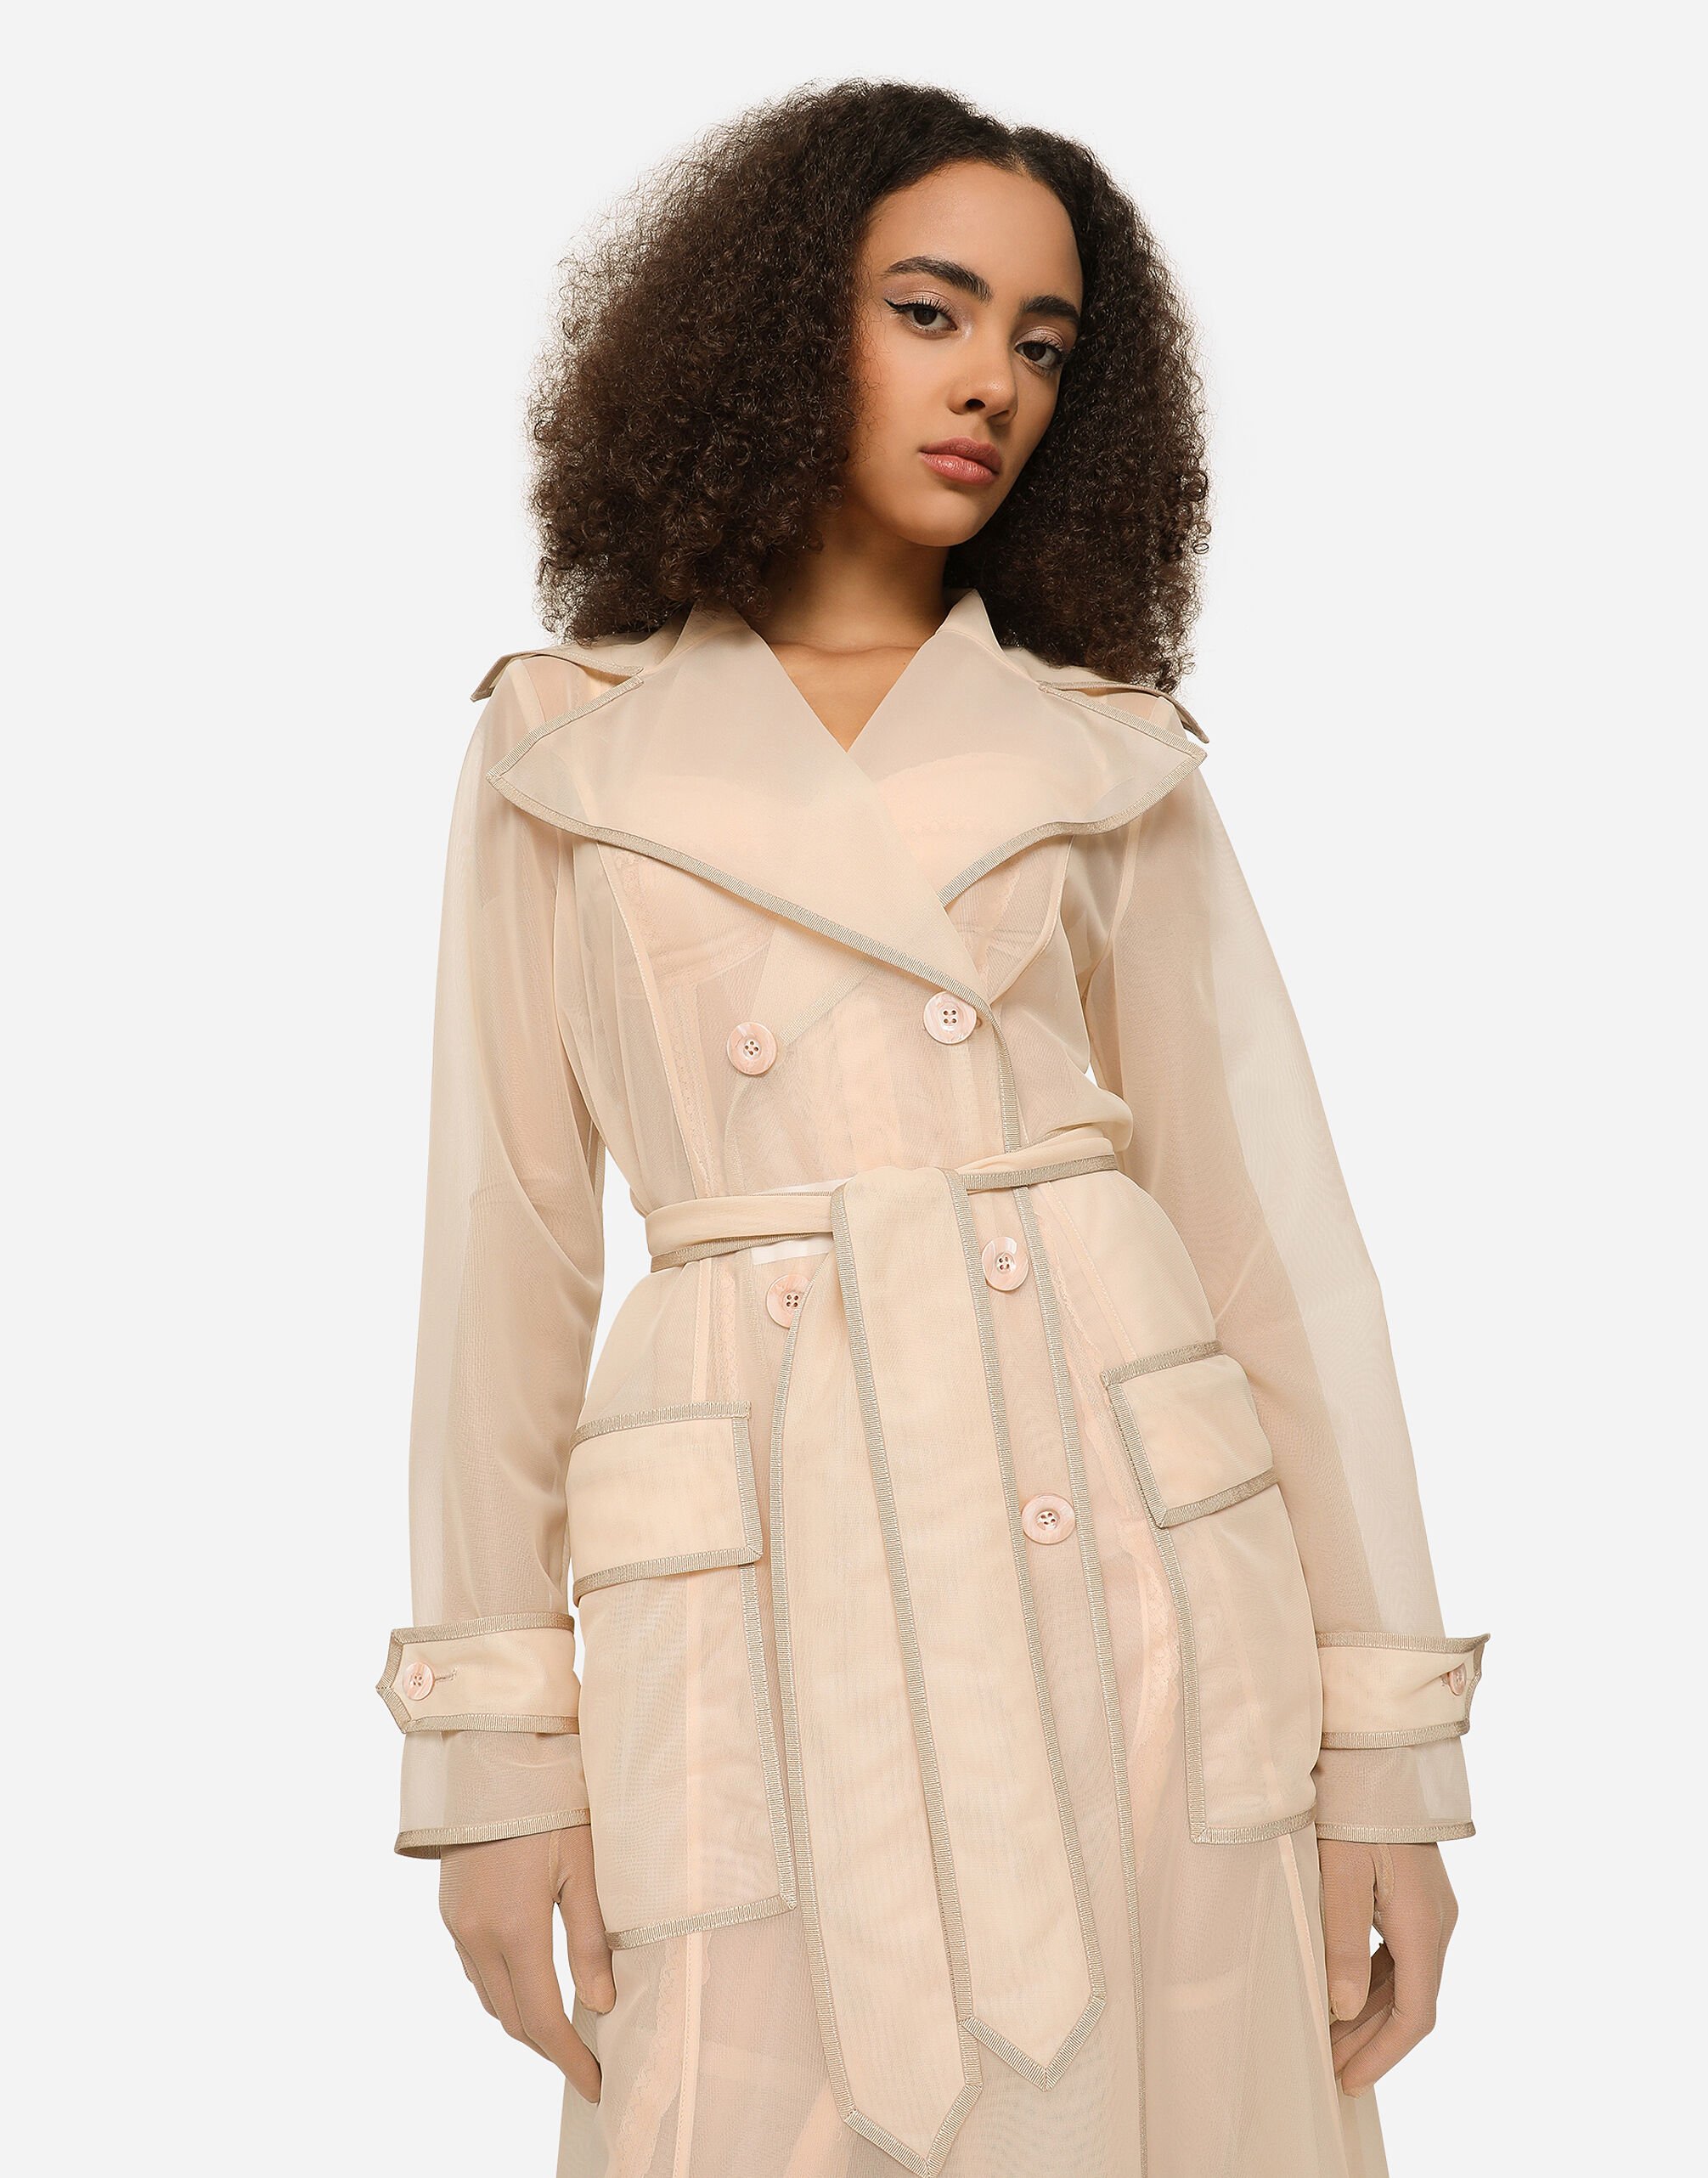 KIM DOLCE&GABBANA Marquisette trench coat with belt in Pale Pink 